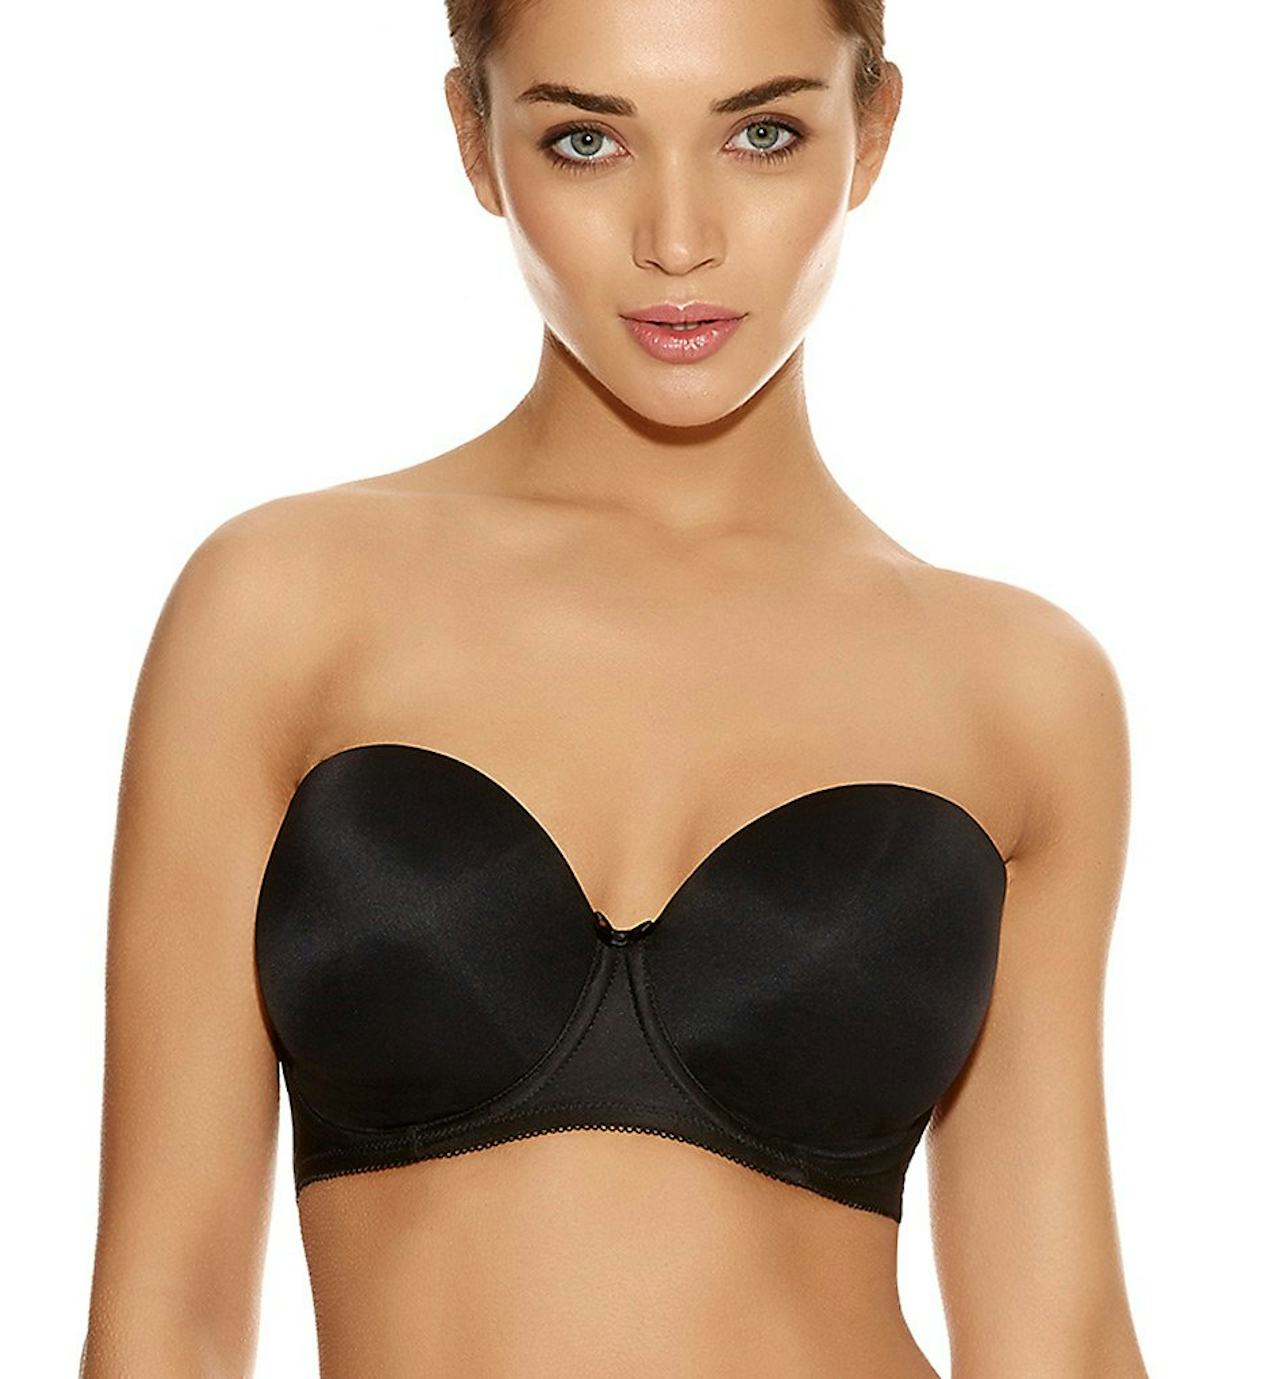 Where To Buy Strapless Bras For Large Breasts 